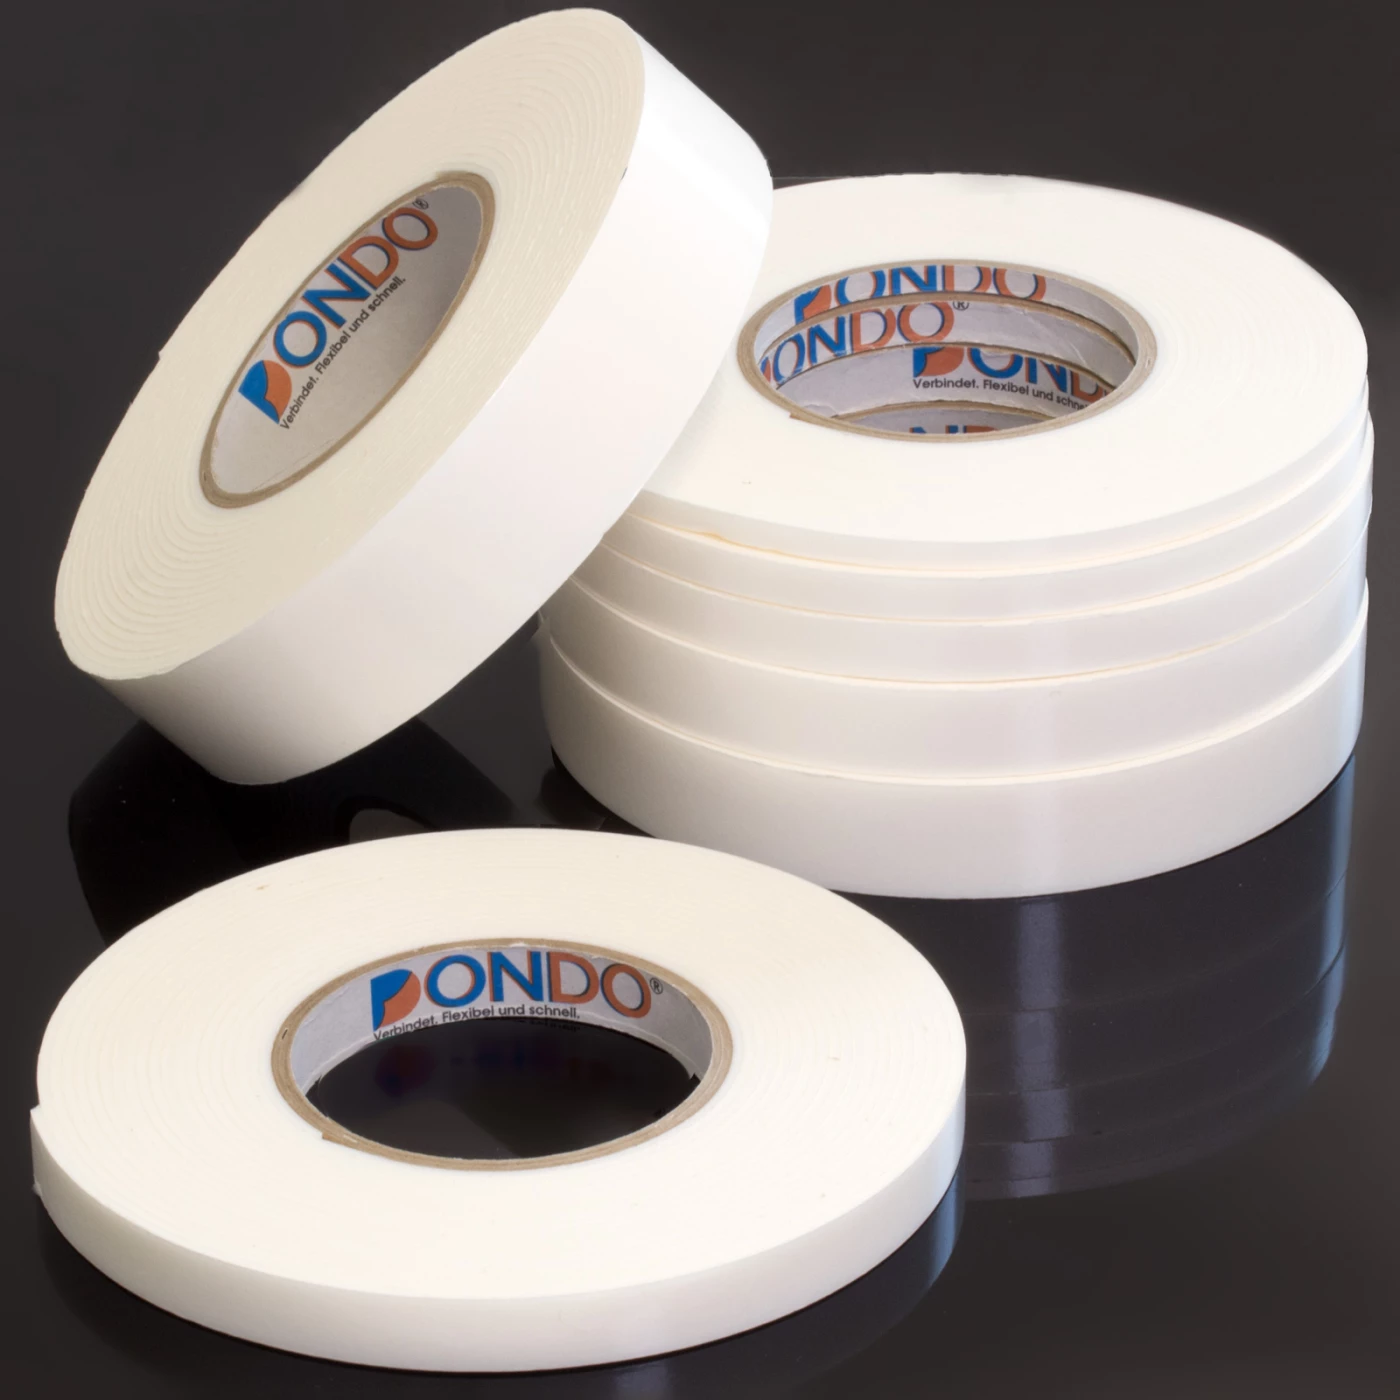 Double-sided adhesive tapes for mirrors, signs or strips